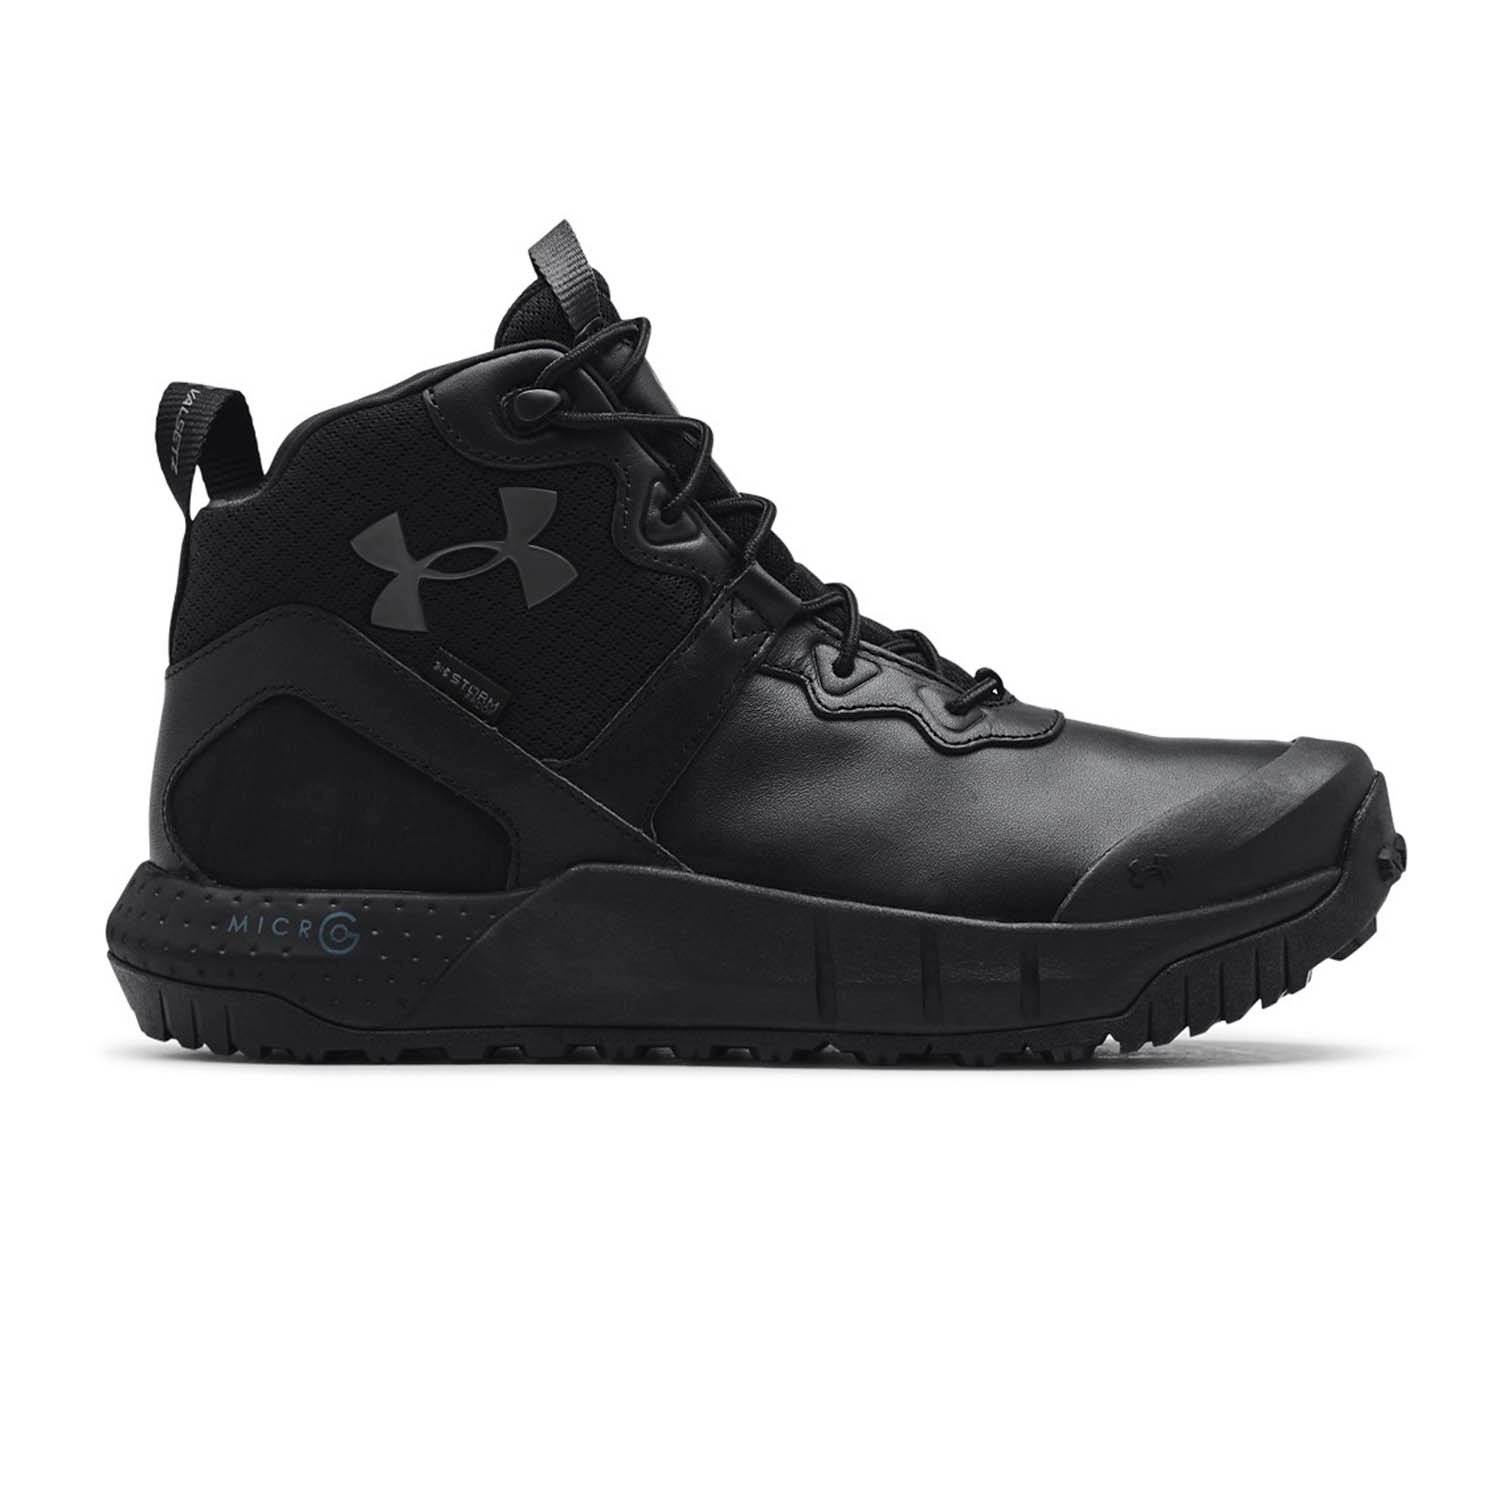 Under Armour Boots, Duty Boots & Tactical Boots